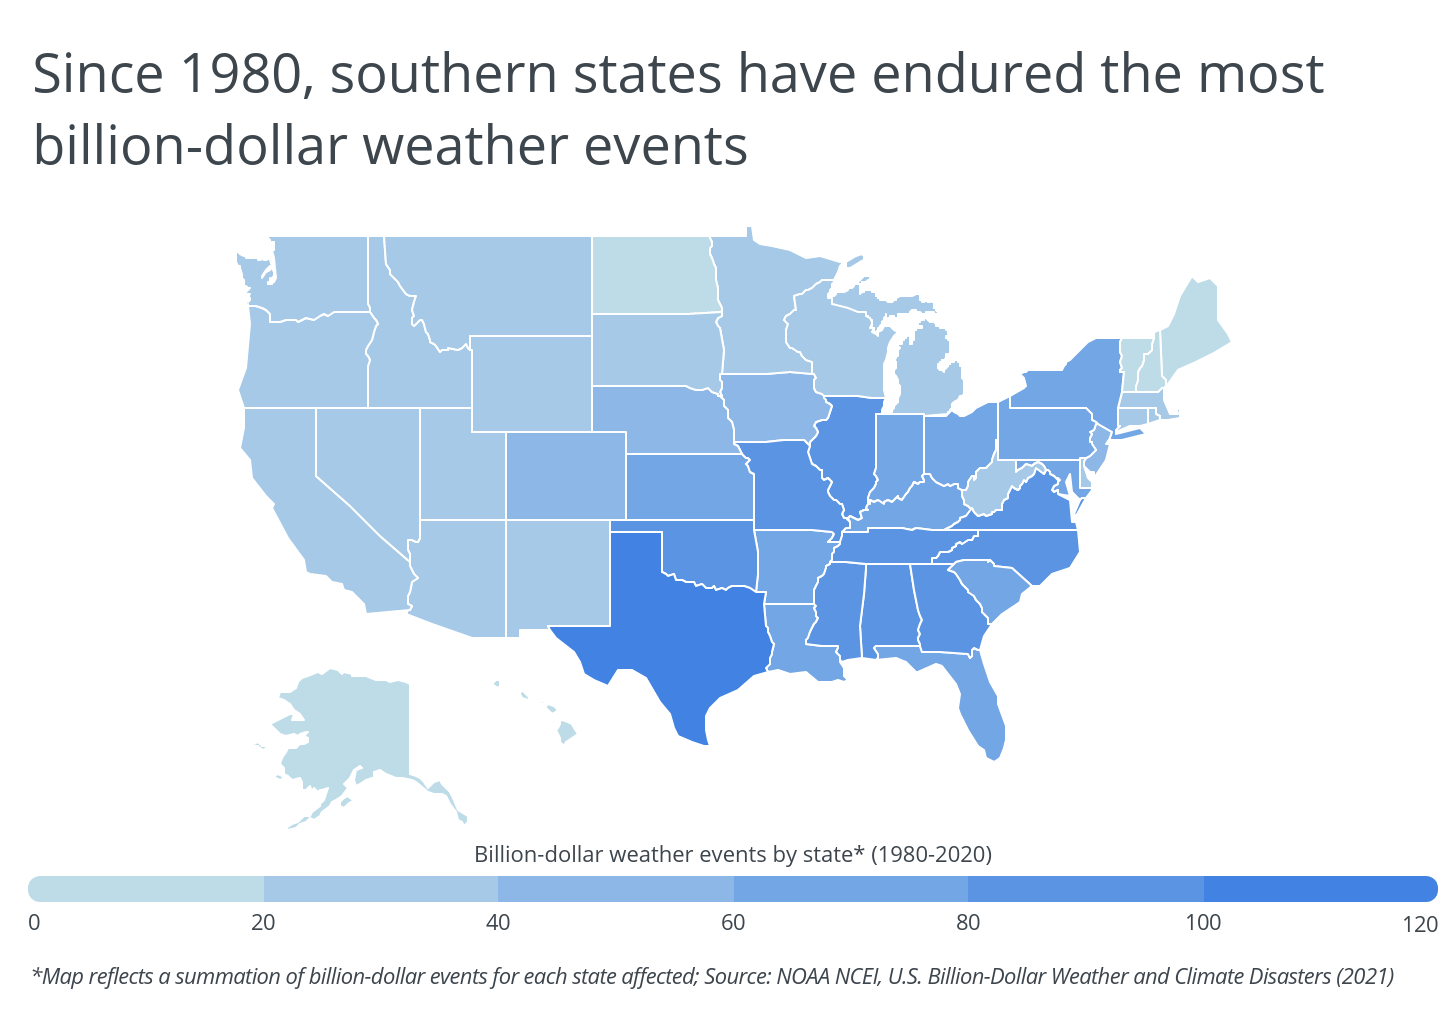 Southern states have endured the most billion-dollar weather events